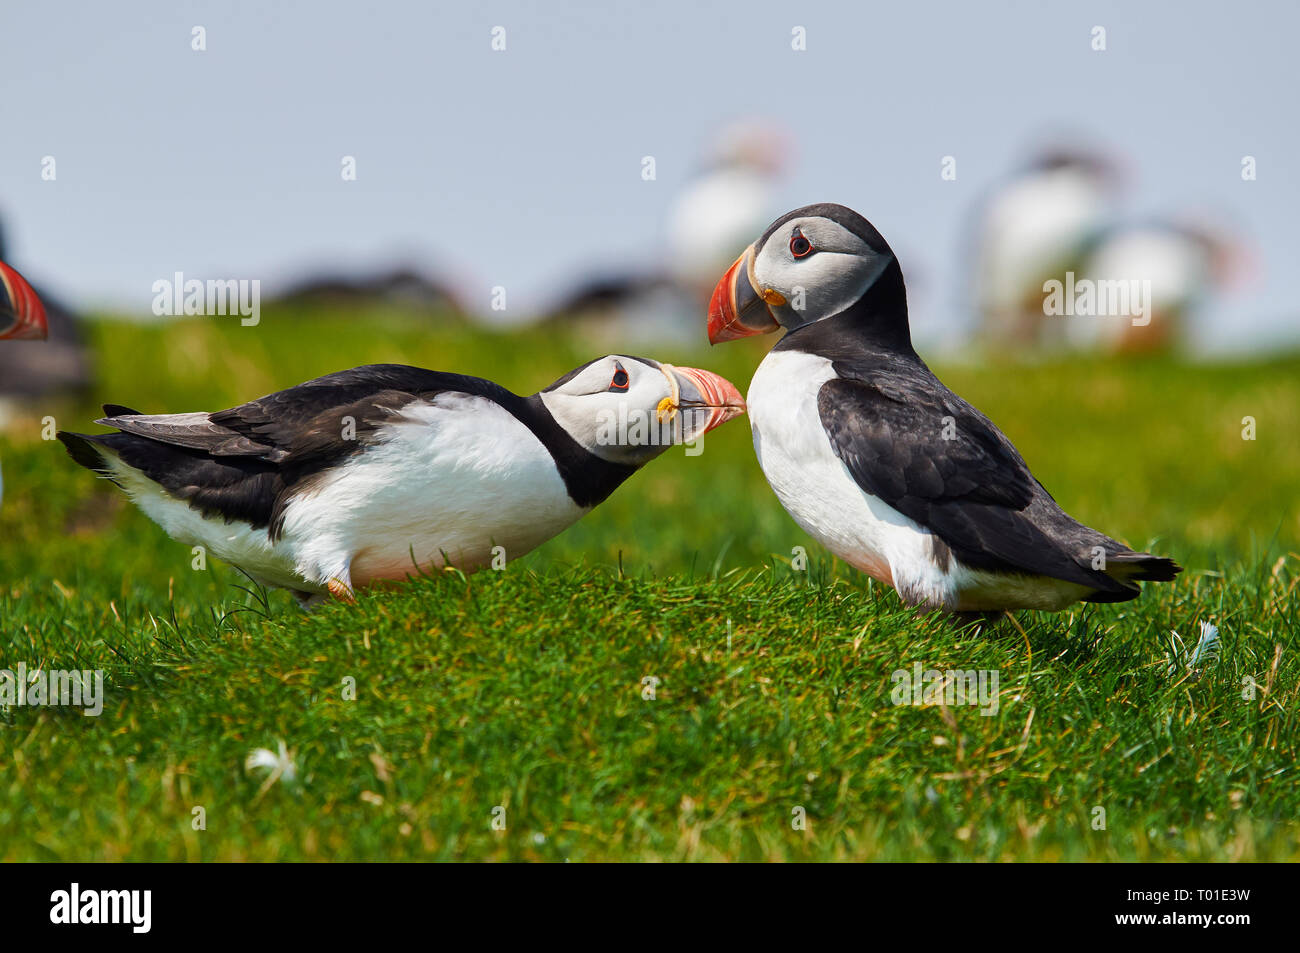 Atlantic puffin, Common puffin (Fratercula arctica), two common puffins looking at each other, Mykines Faroe Islands Stock Photo